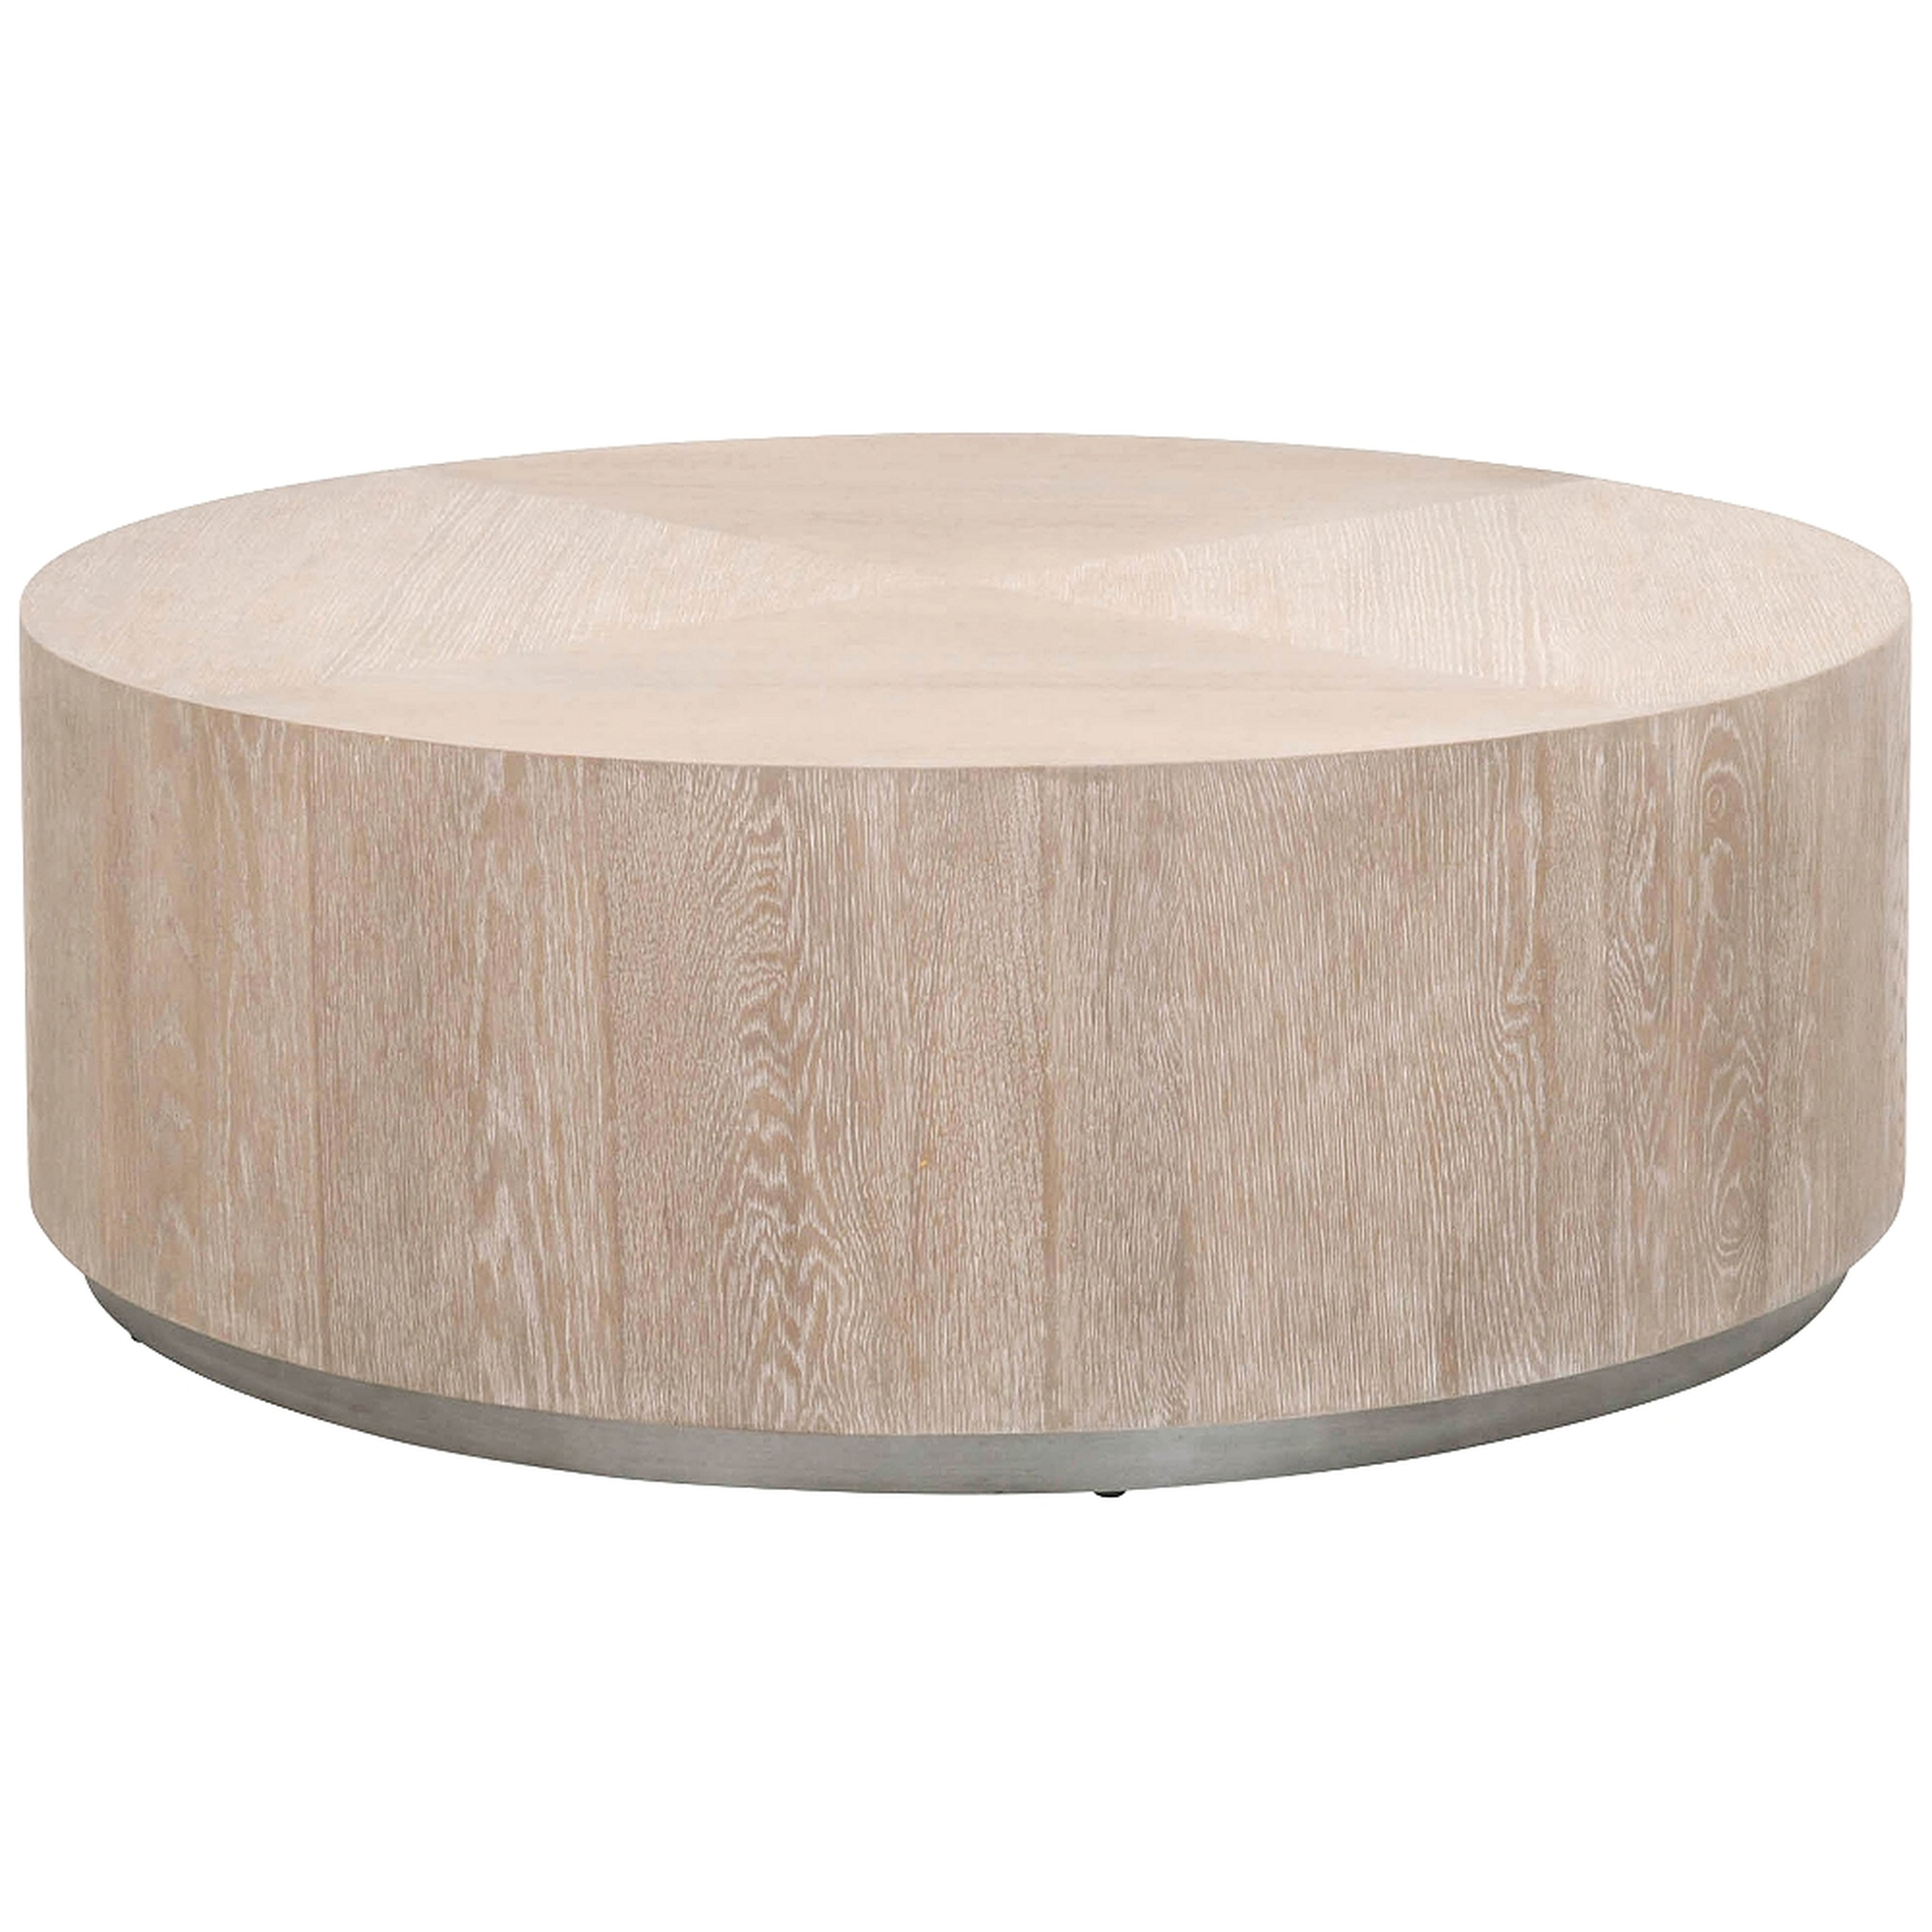 Roto 42 1/2" Wide Natural Gray Oak Wood Round Coffee Table - Style # 86N26 - Lamps Plus